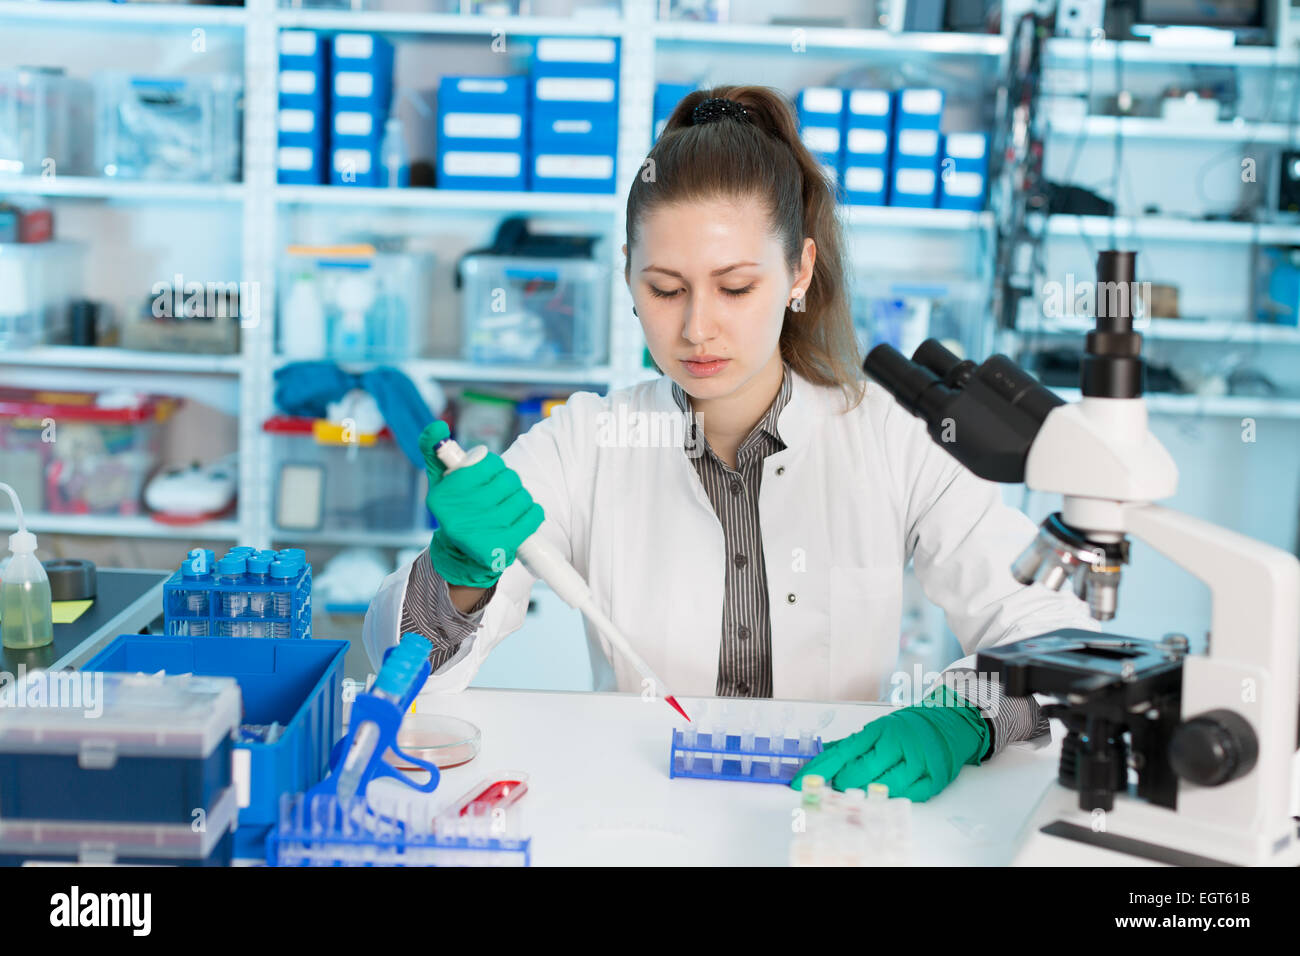 young women science professional pipetting solution into the glass test tube. Stock Photo